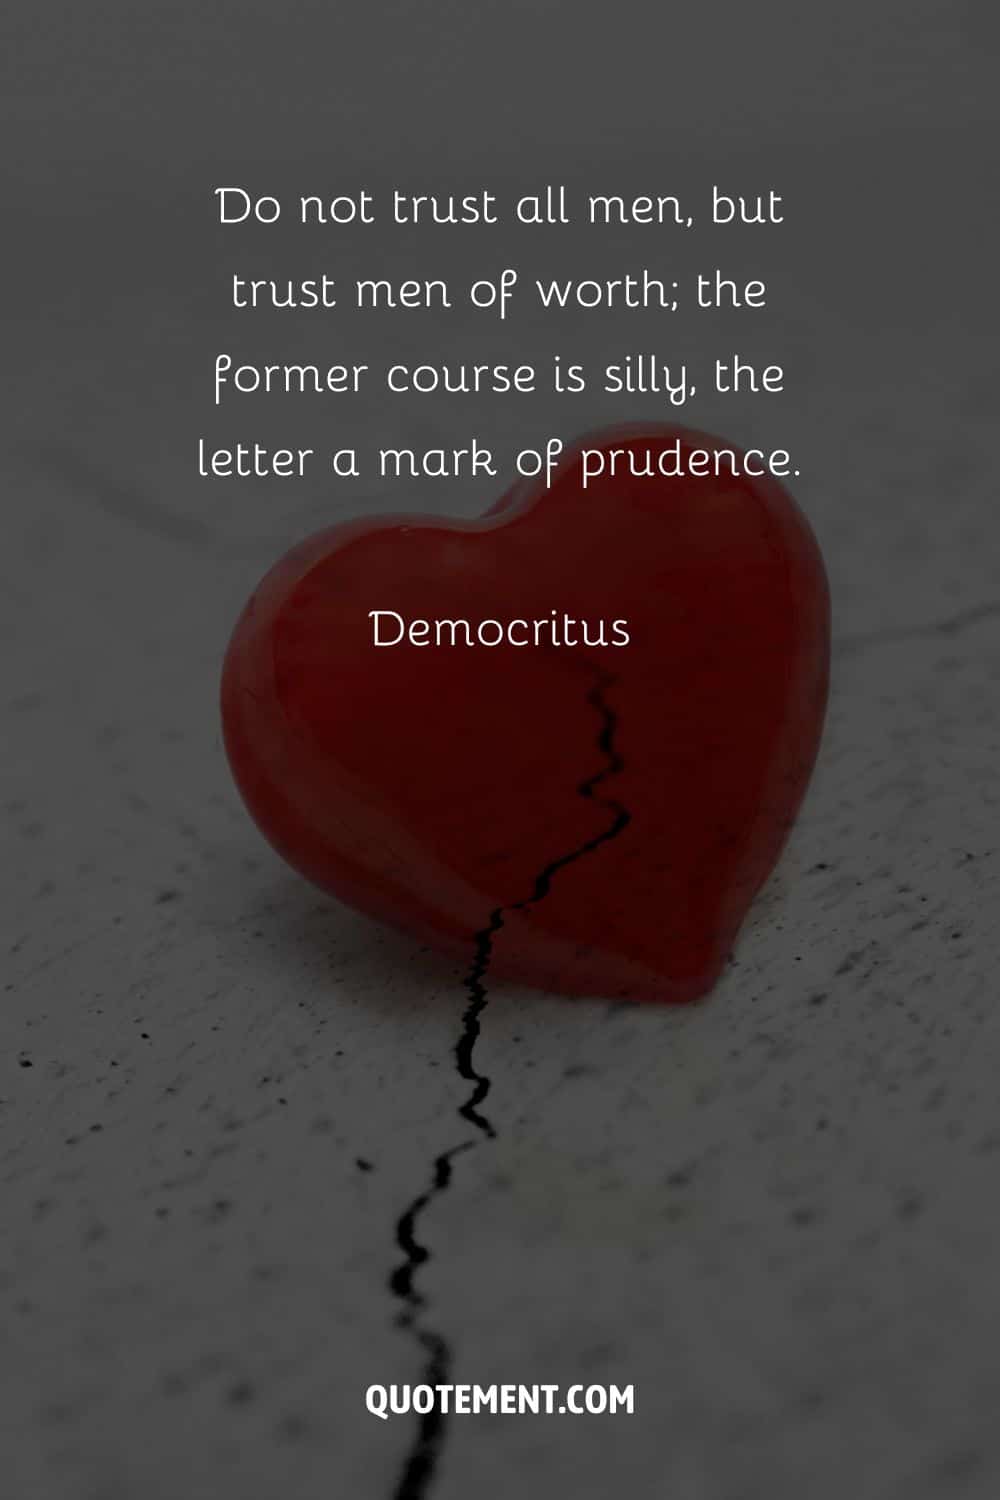 “Do not trust all men, but trust men of worth; the former course is silly, the latter a mark of prudence.” — Democritus